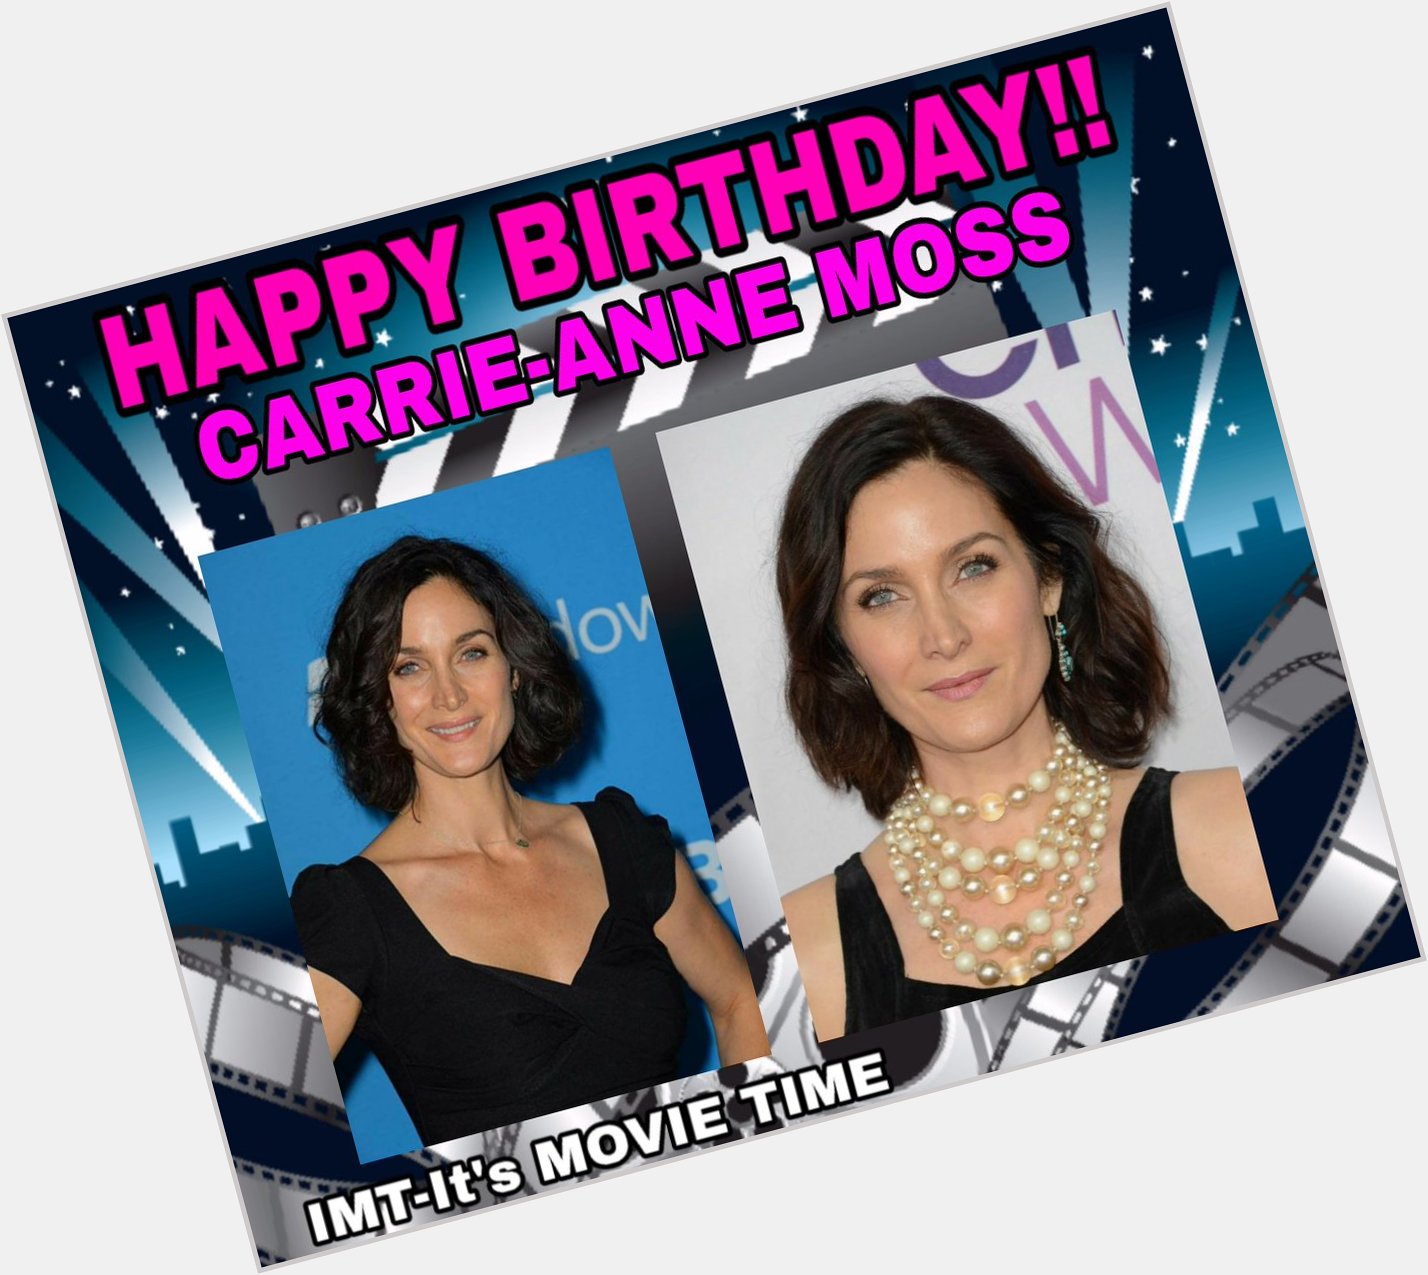 Happy Birthday to Carrie-Anne Moss! The actress is celebrating 53 years. 